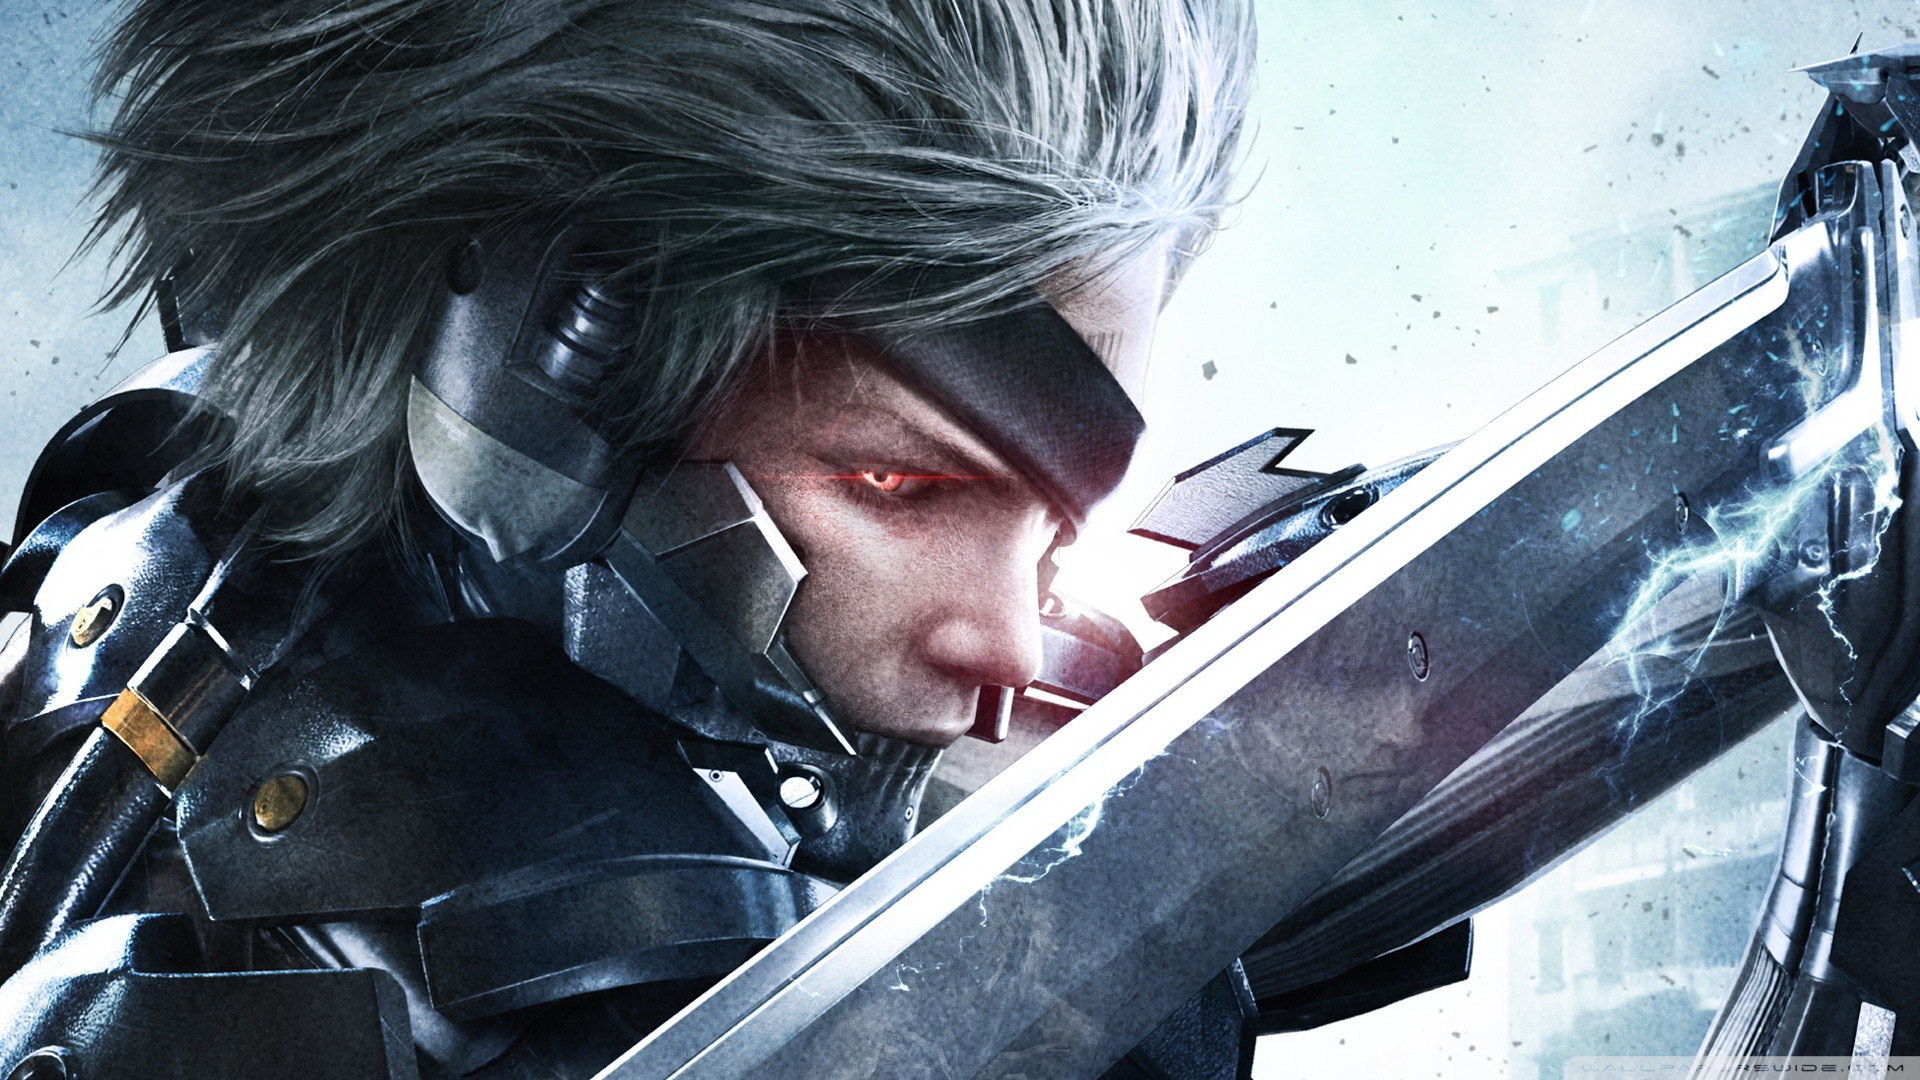 Best Metal Gear Rising: Revengeance (MGR) background ID:130570 for High Resolution hd 1920x1080 PC